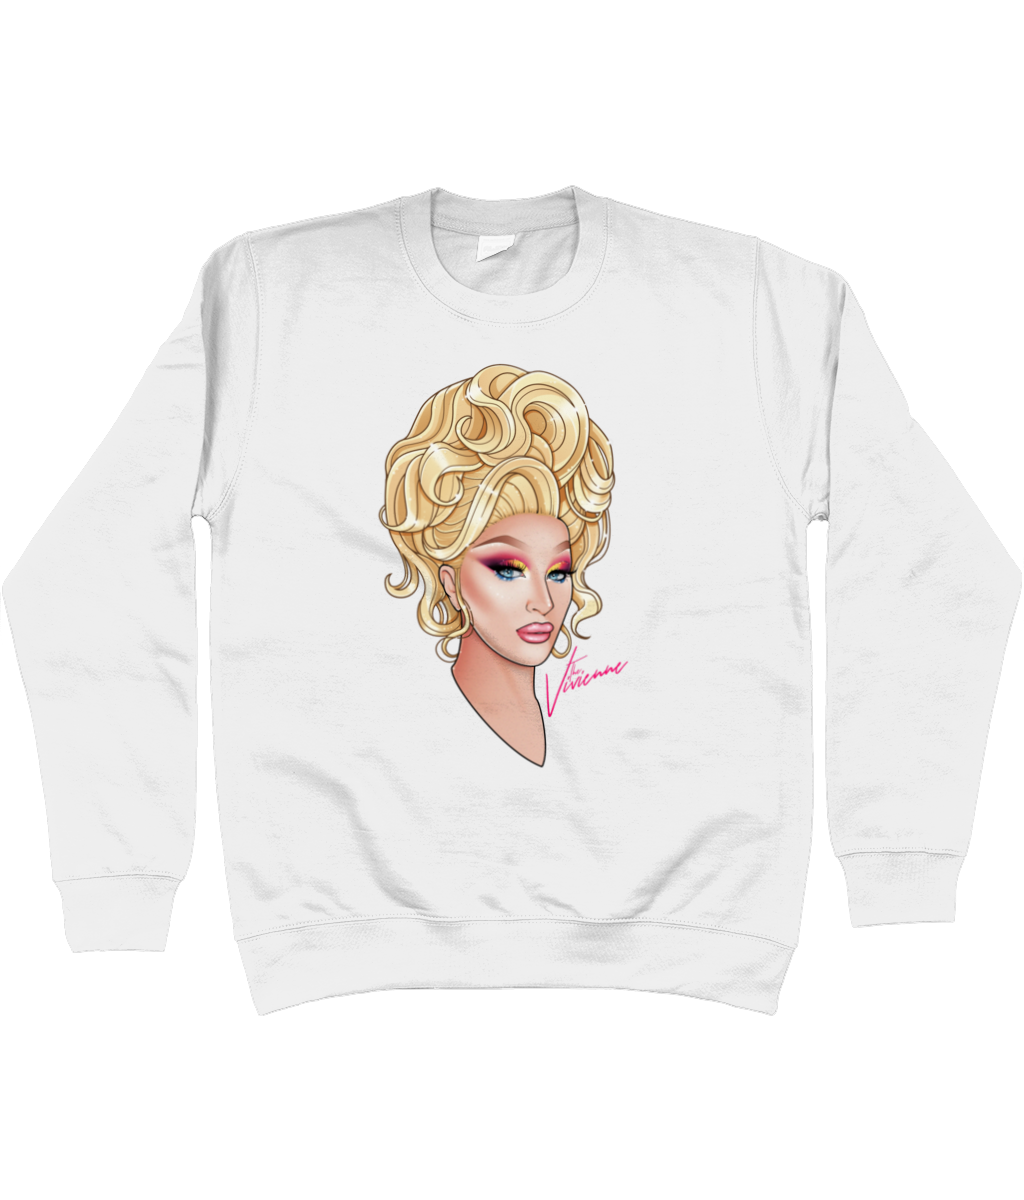 The Vivienne - Official Merch - Sweater